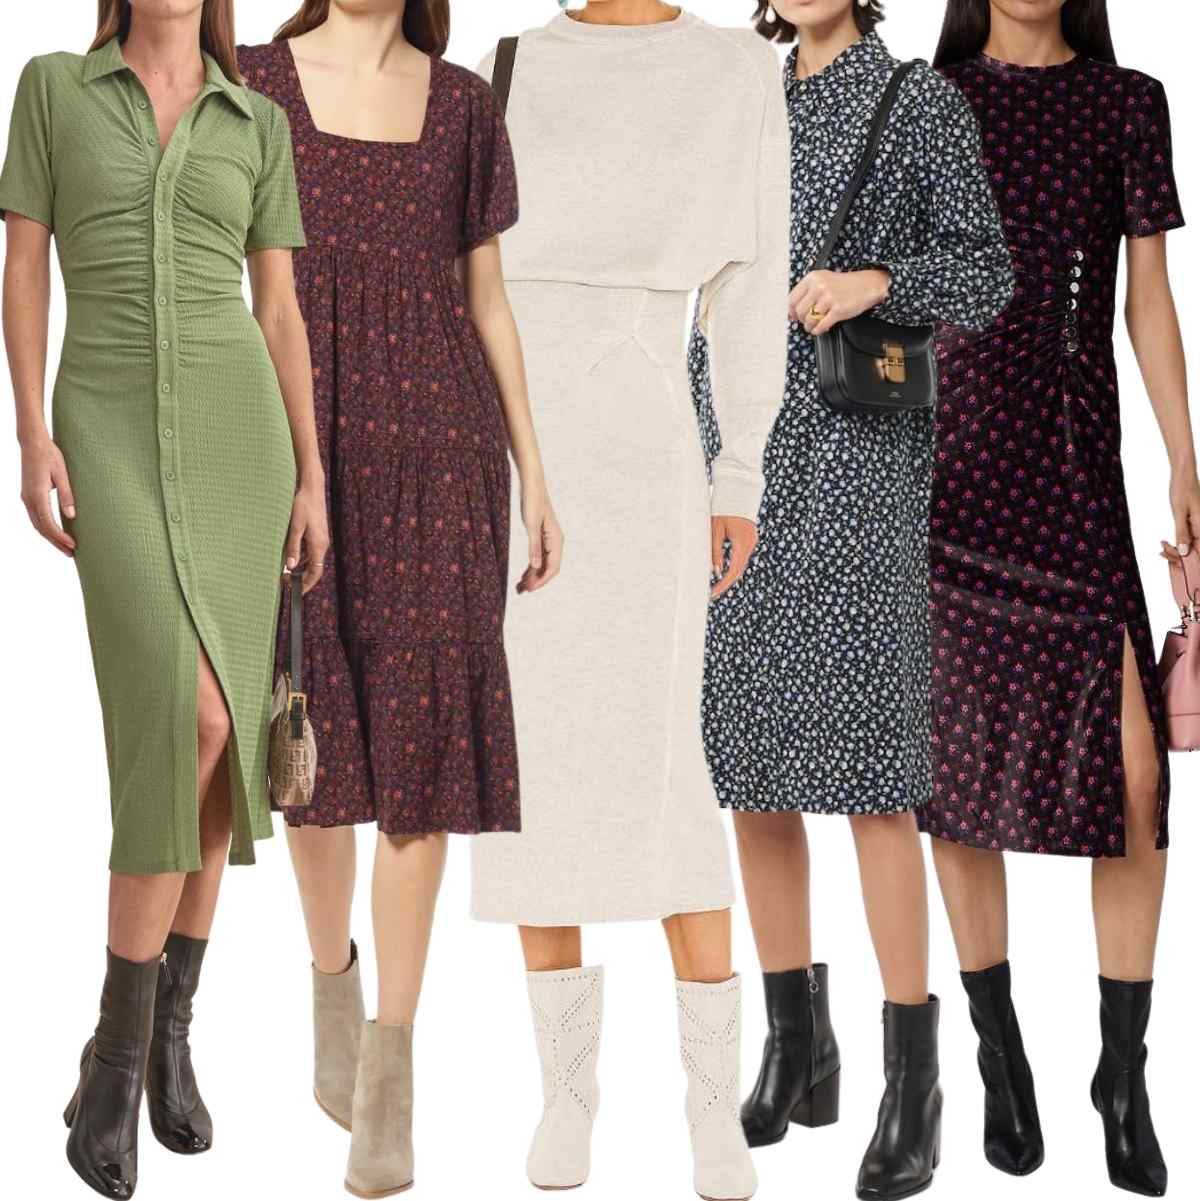 Collage of 5 women wearing different midi dresses with ankle boots.